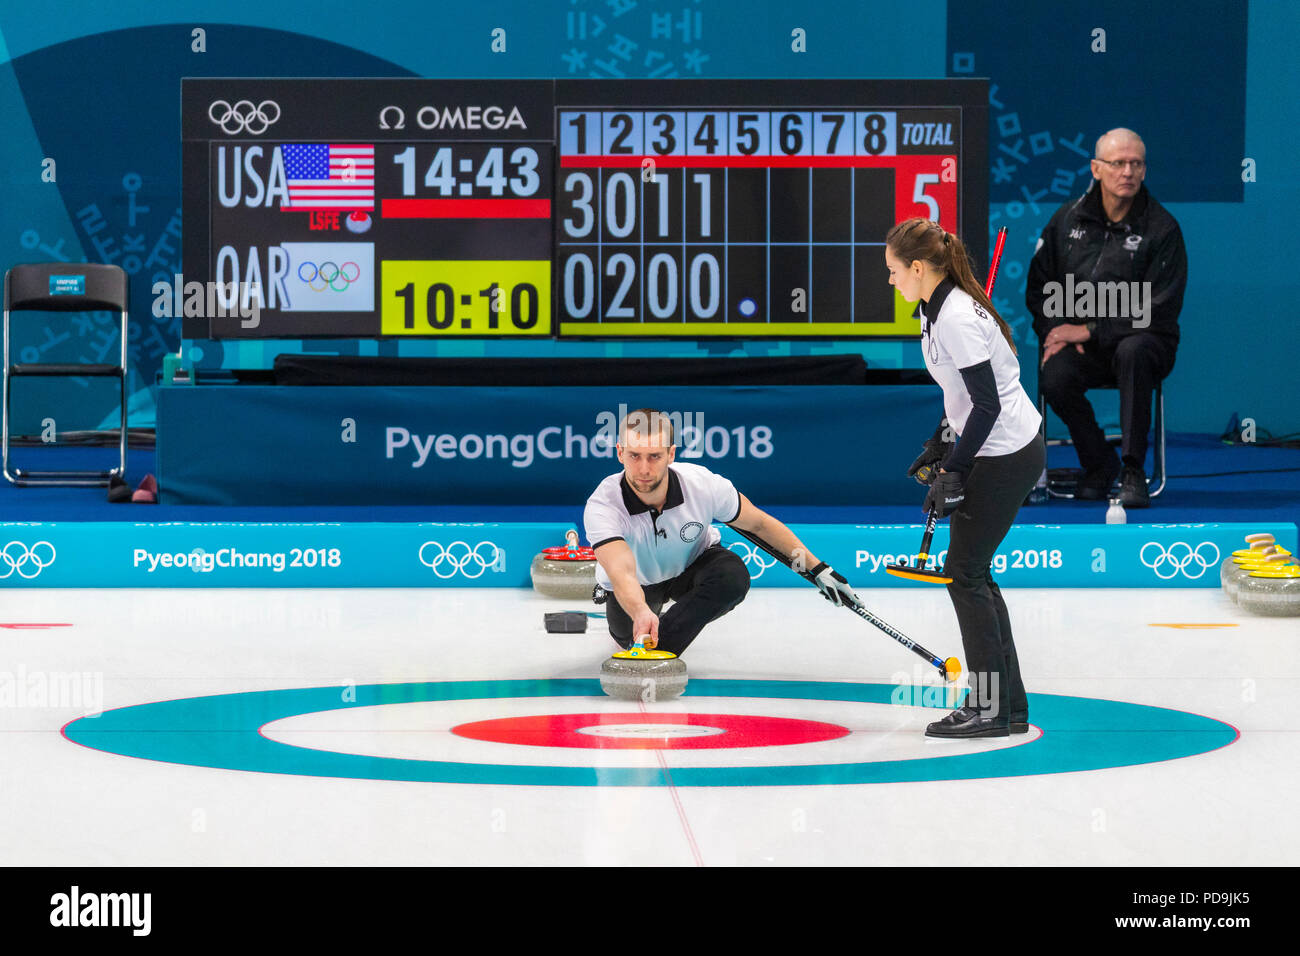 Anastasia BRYZGALOVA and Aleksandr KRUSHELNITCKII (OAR) competing in the  Mixed Doubles Curling round robin at the Olympic Winter Games PyeongChang 2  Stock Photo - Alamy